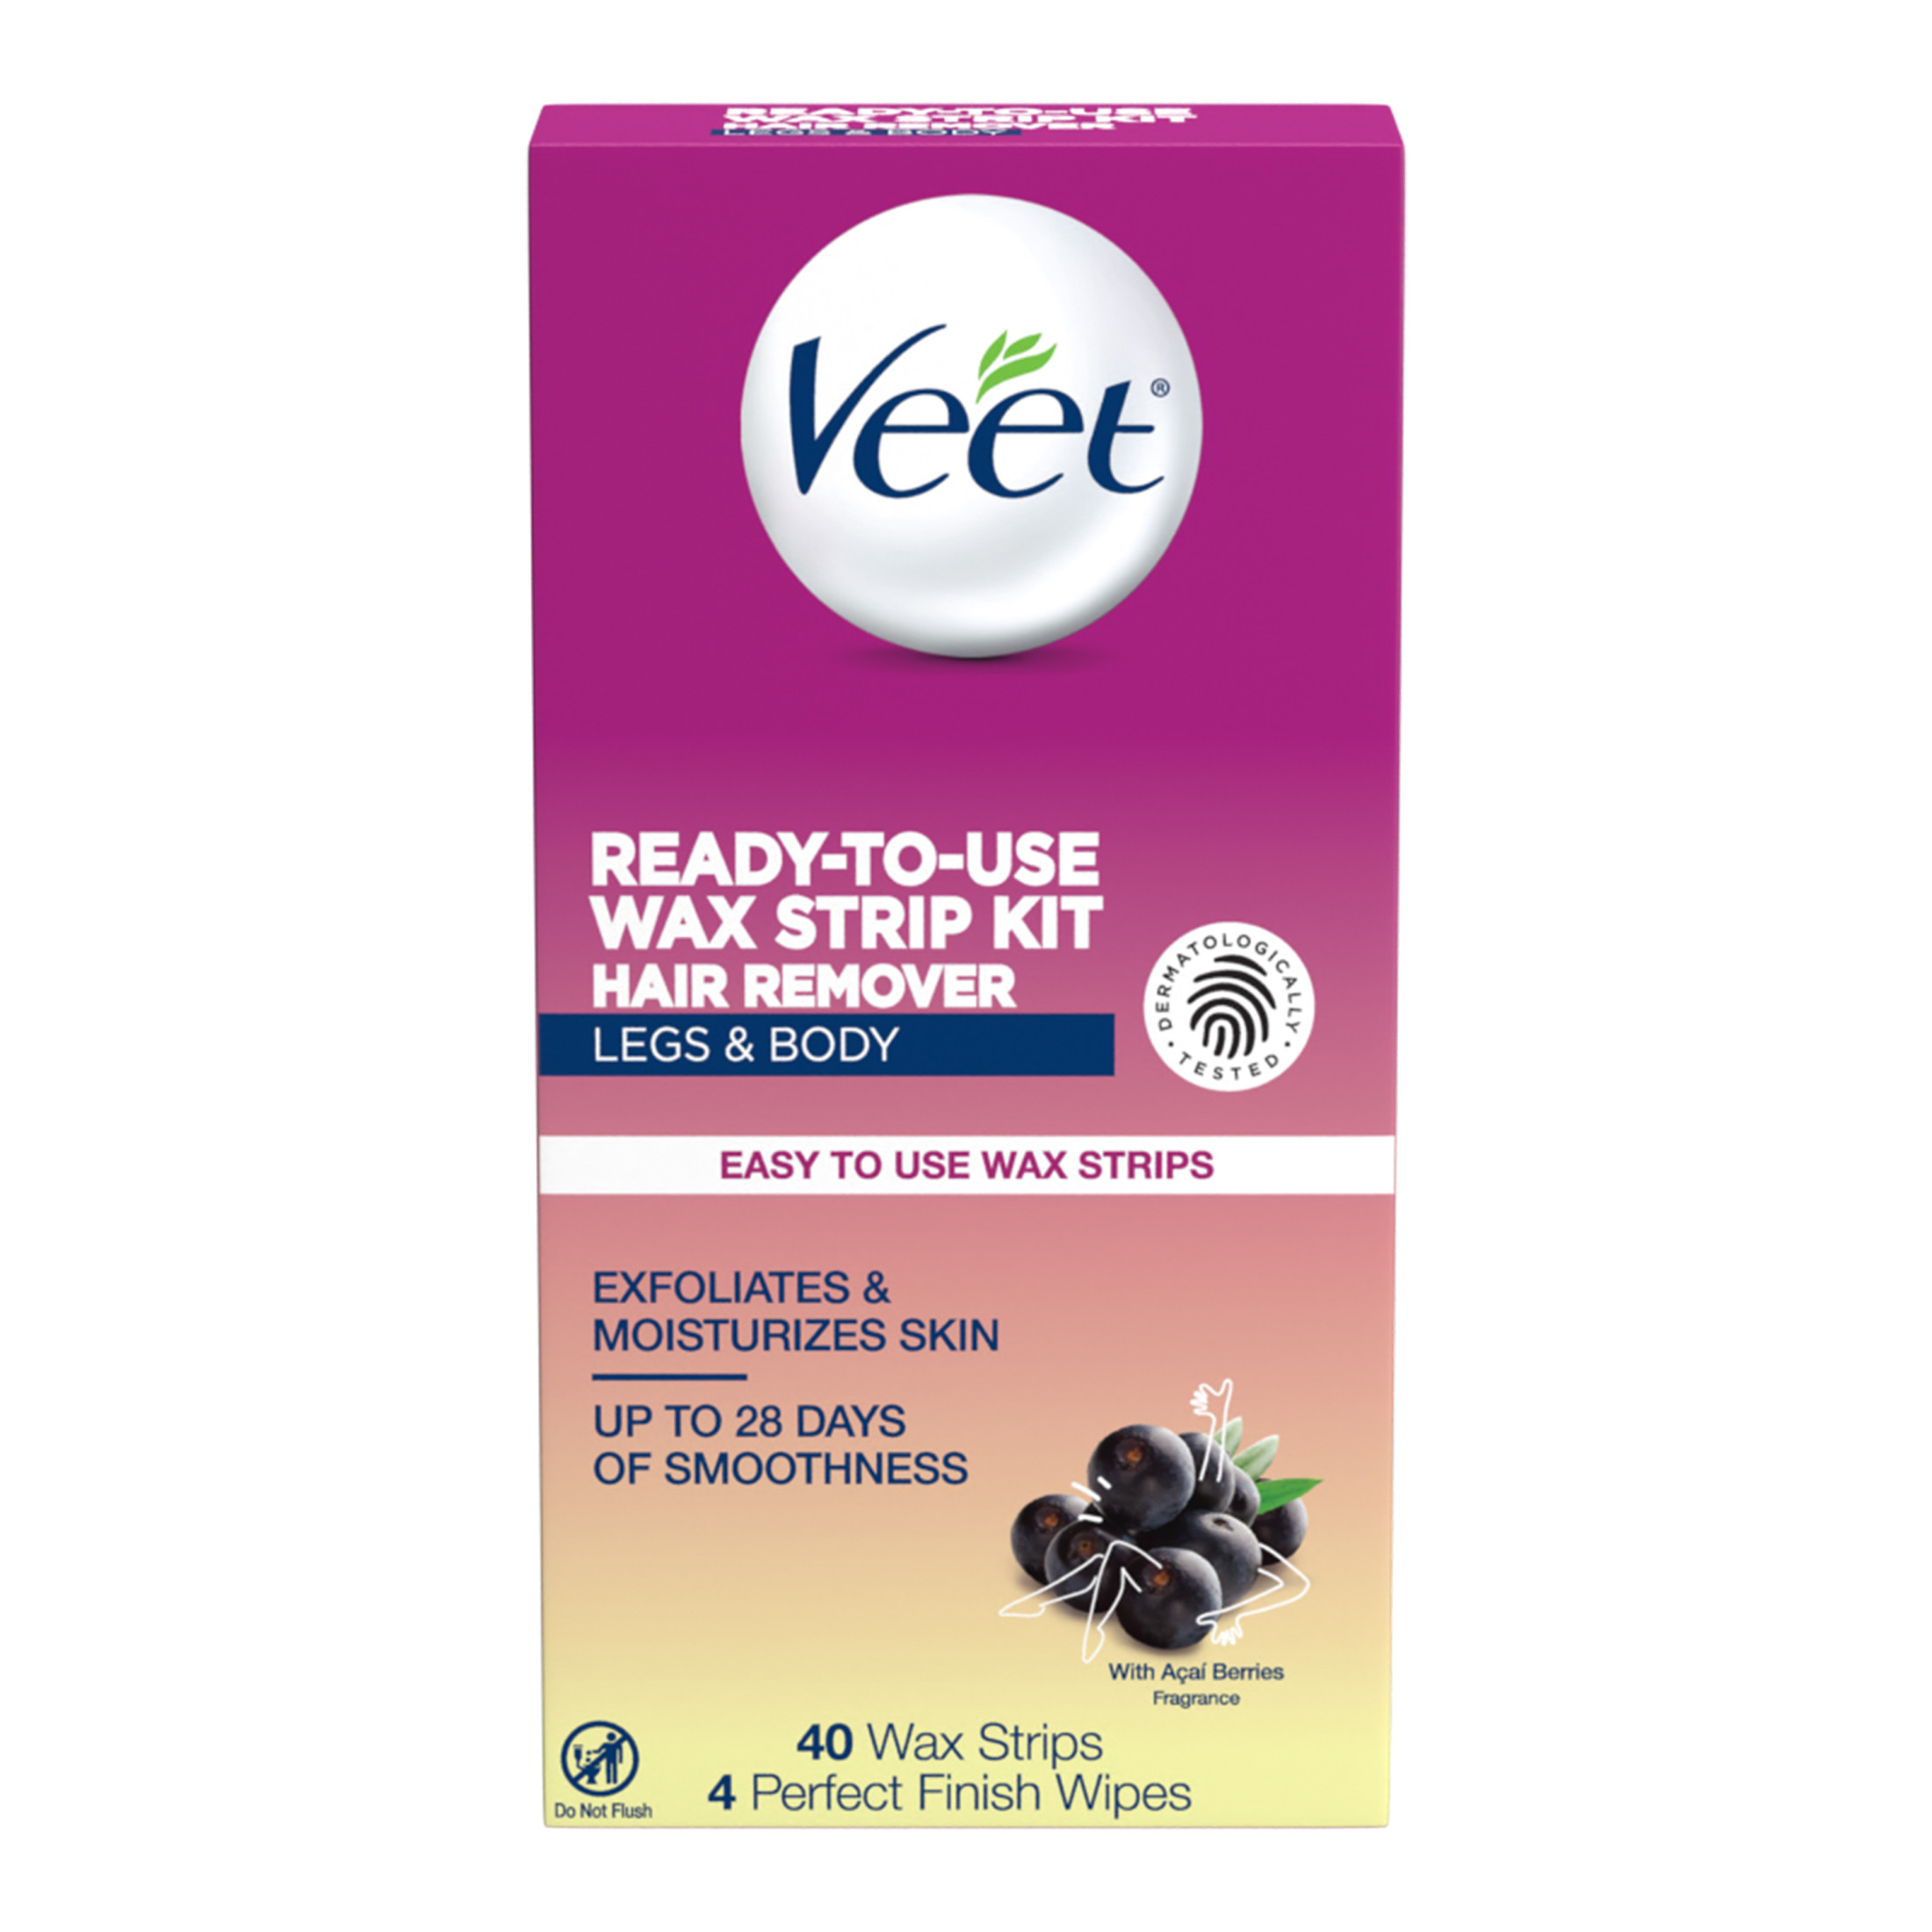 VEET Easy- Gelwax Technology, Sensitive Formula Ready-to-Use Hair Remover Wax Strip Kit with Shea Butter, 40 wax strips with 4 wipes - image 1 of 10